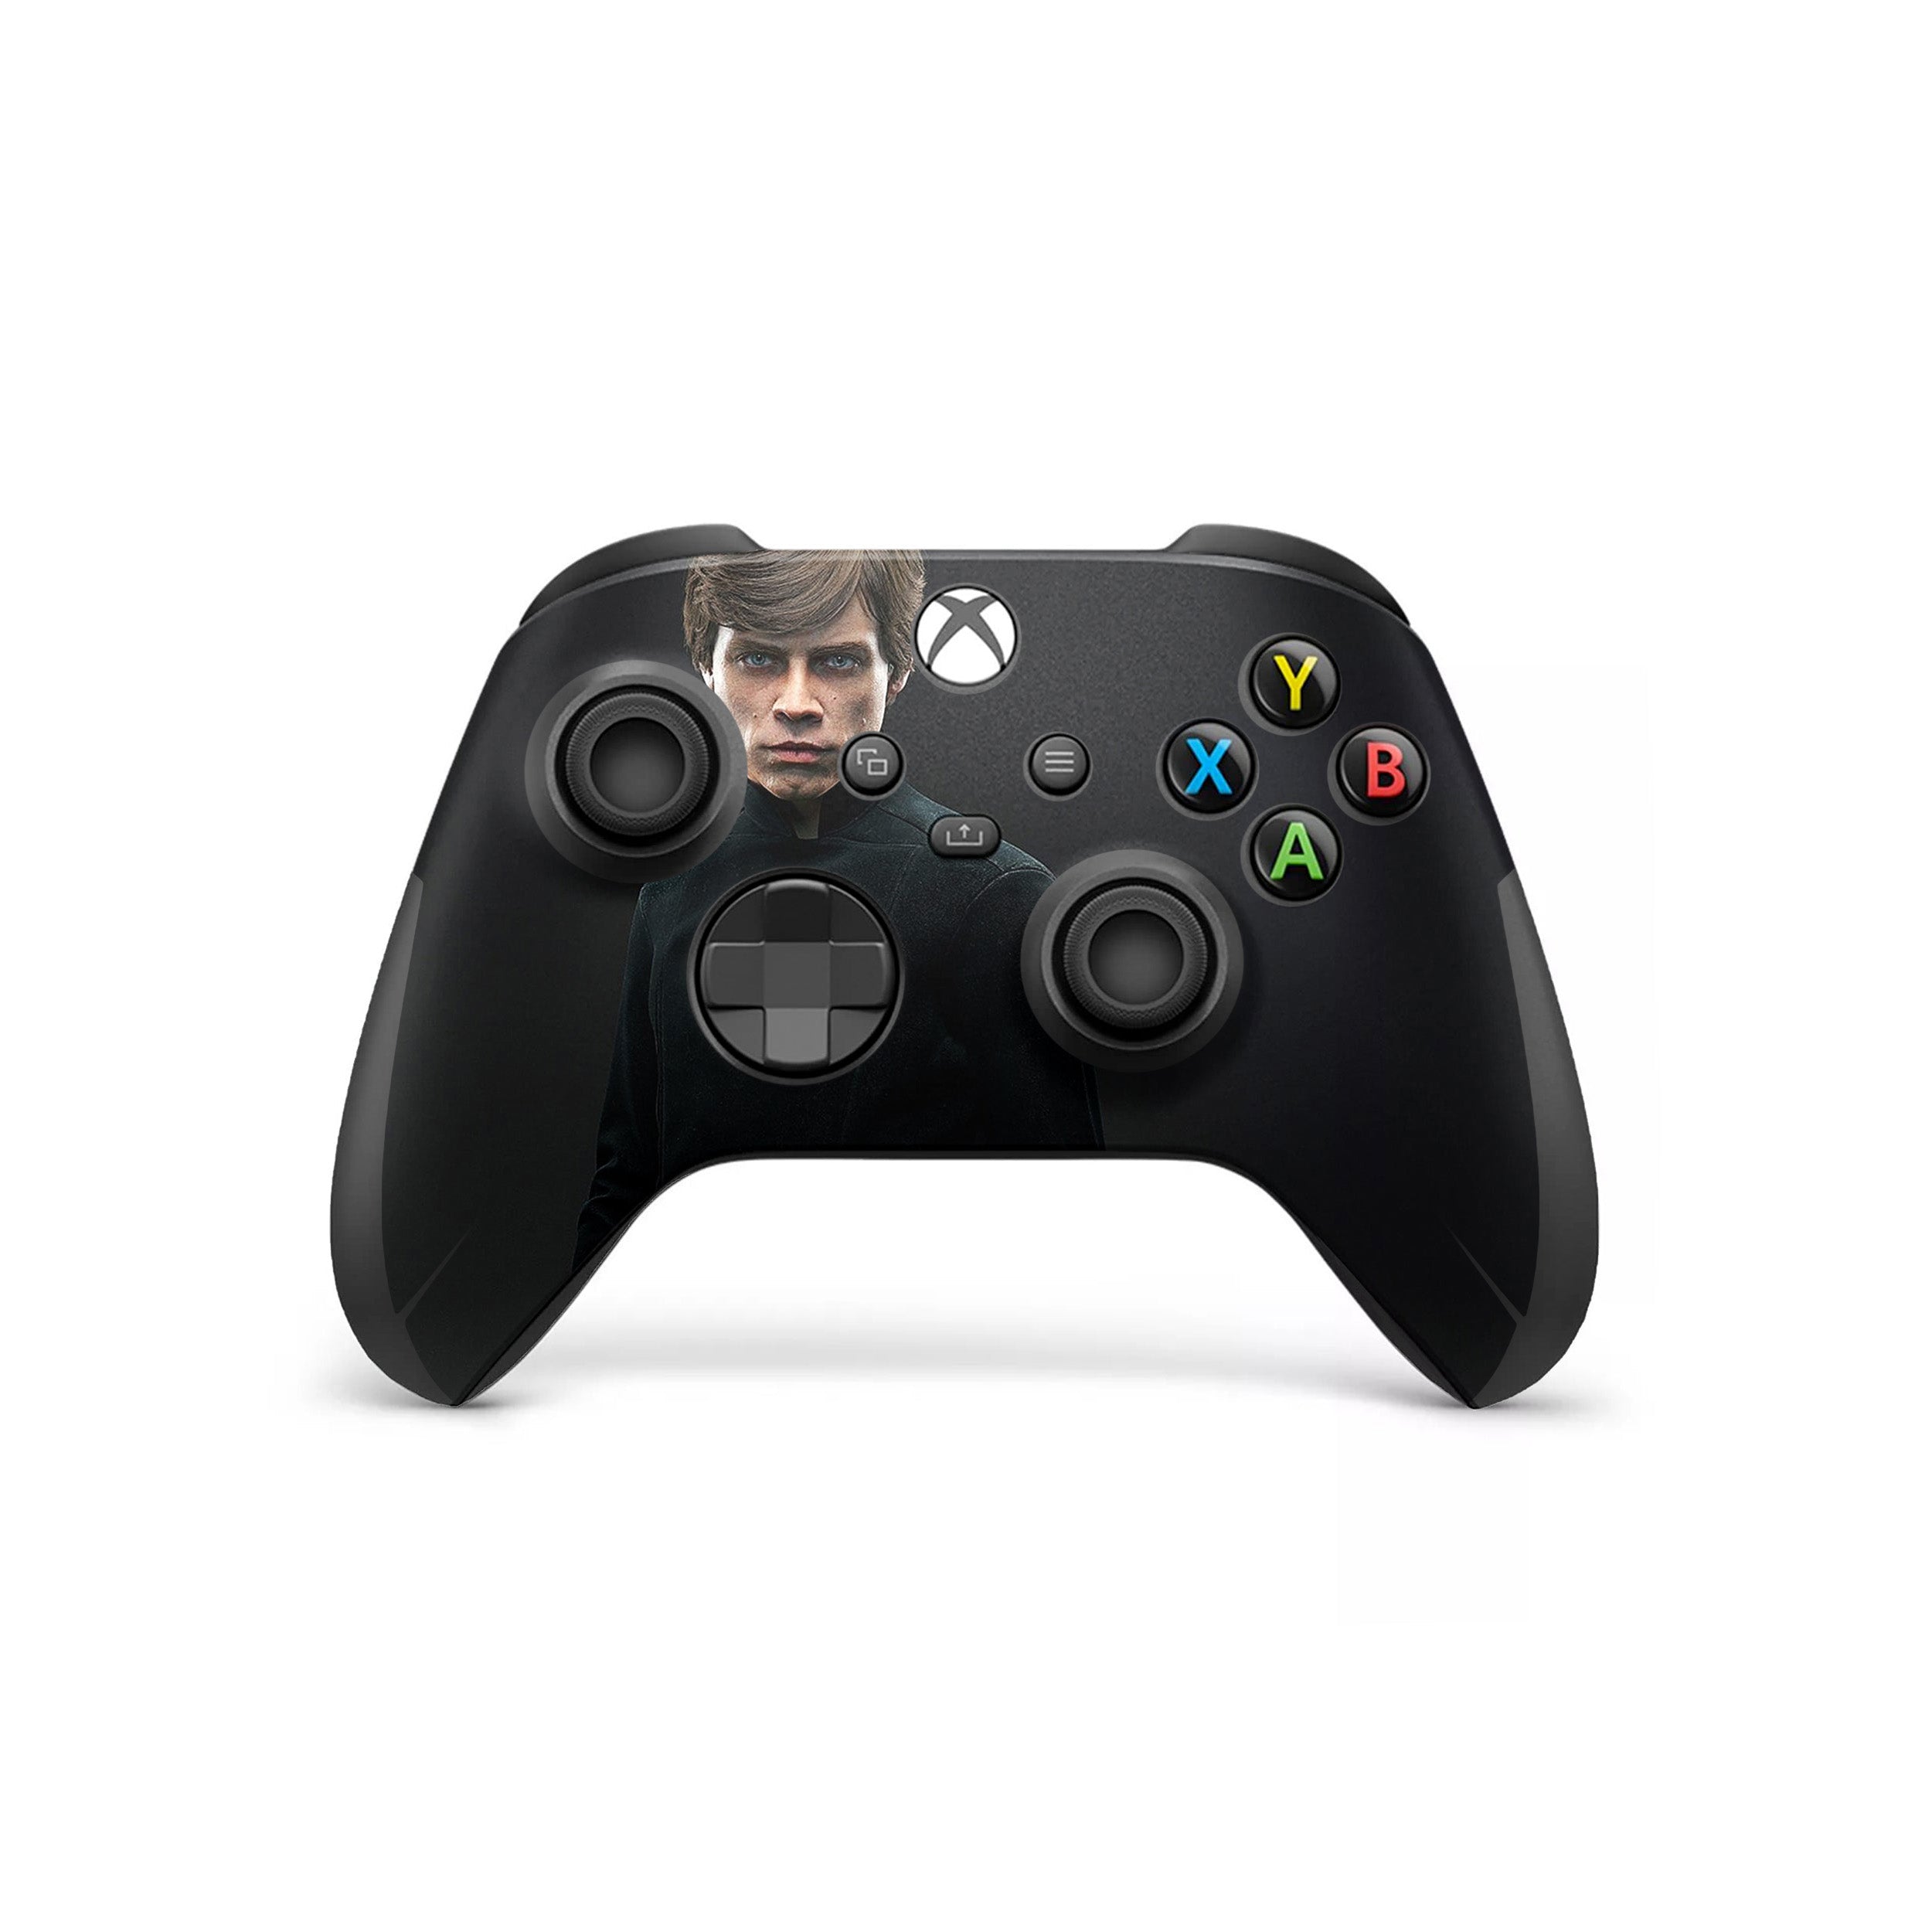 A video game skin featuring a Star Wars Luke Skywalker Rey design for the Xbox Wireless Controller.